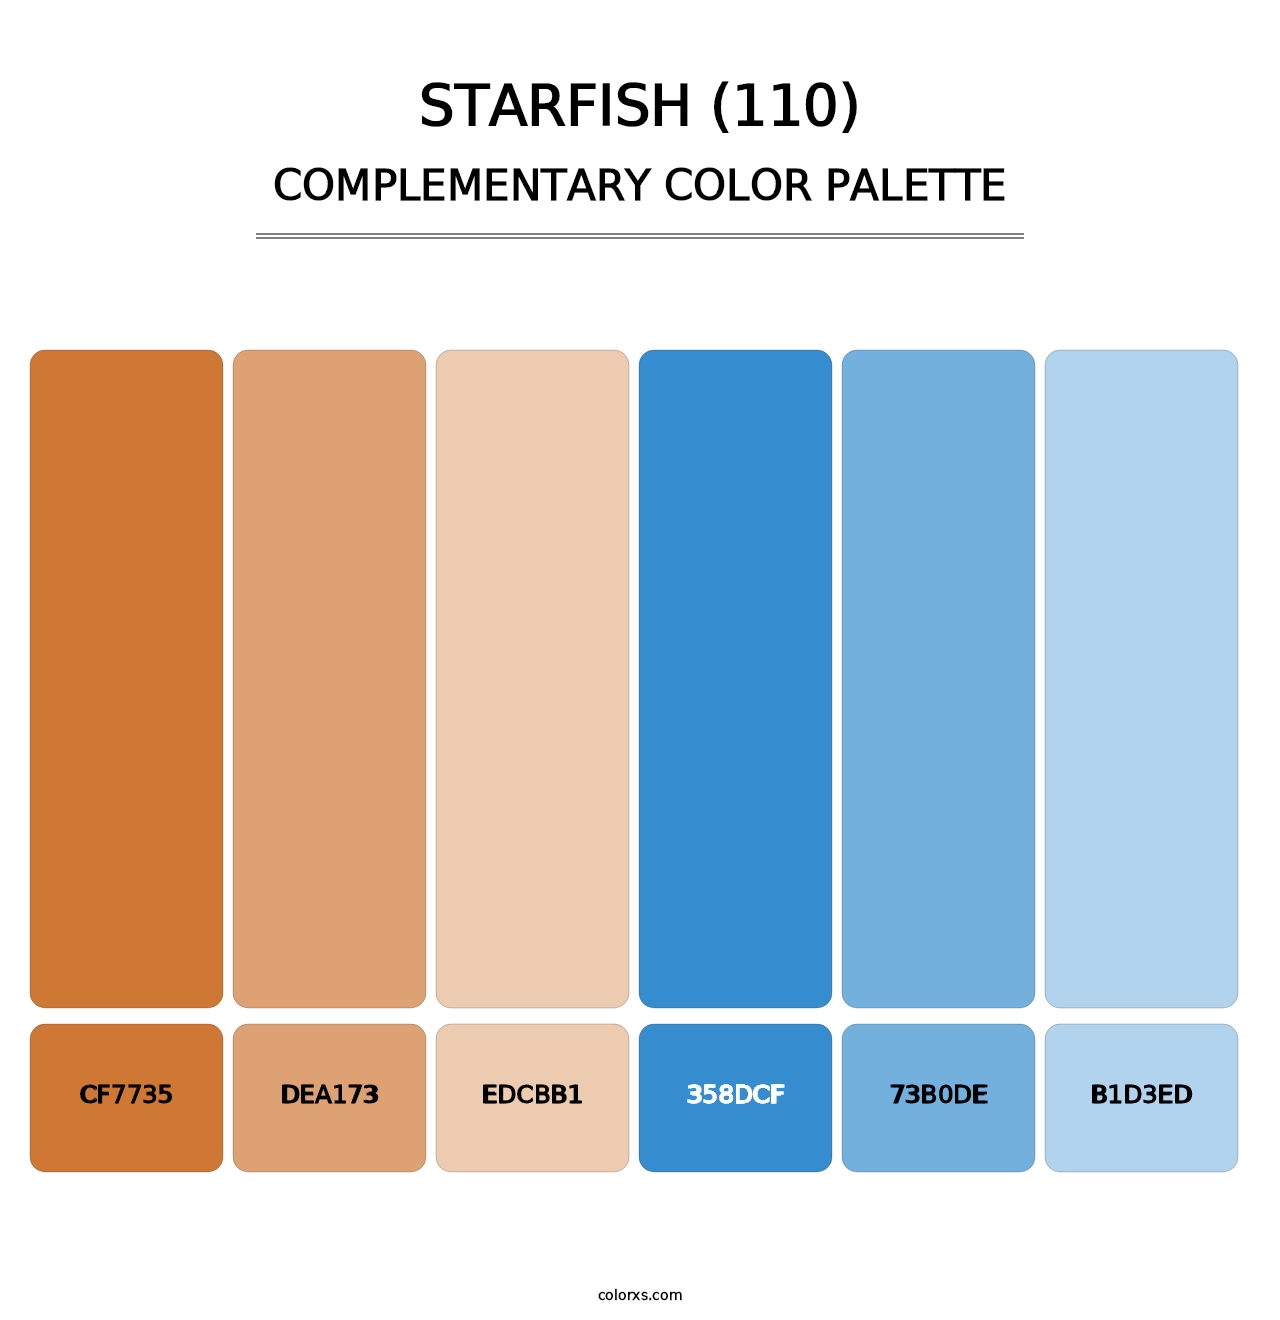 Starfish (110) - Complementary Color Palette